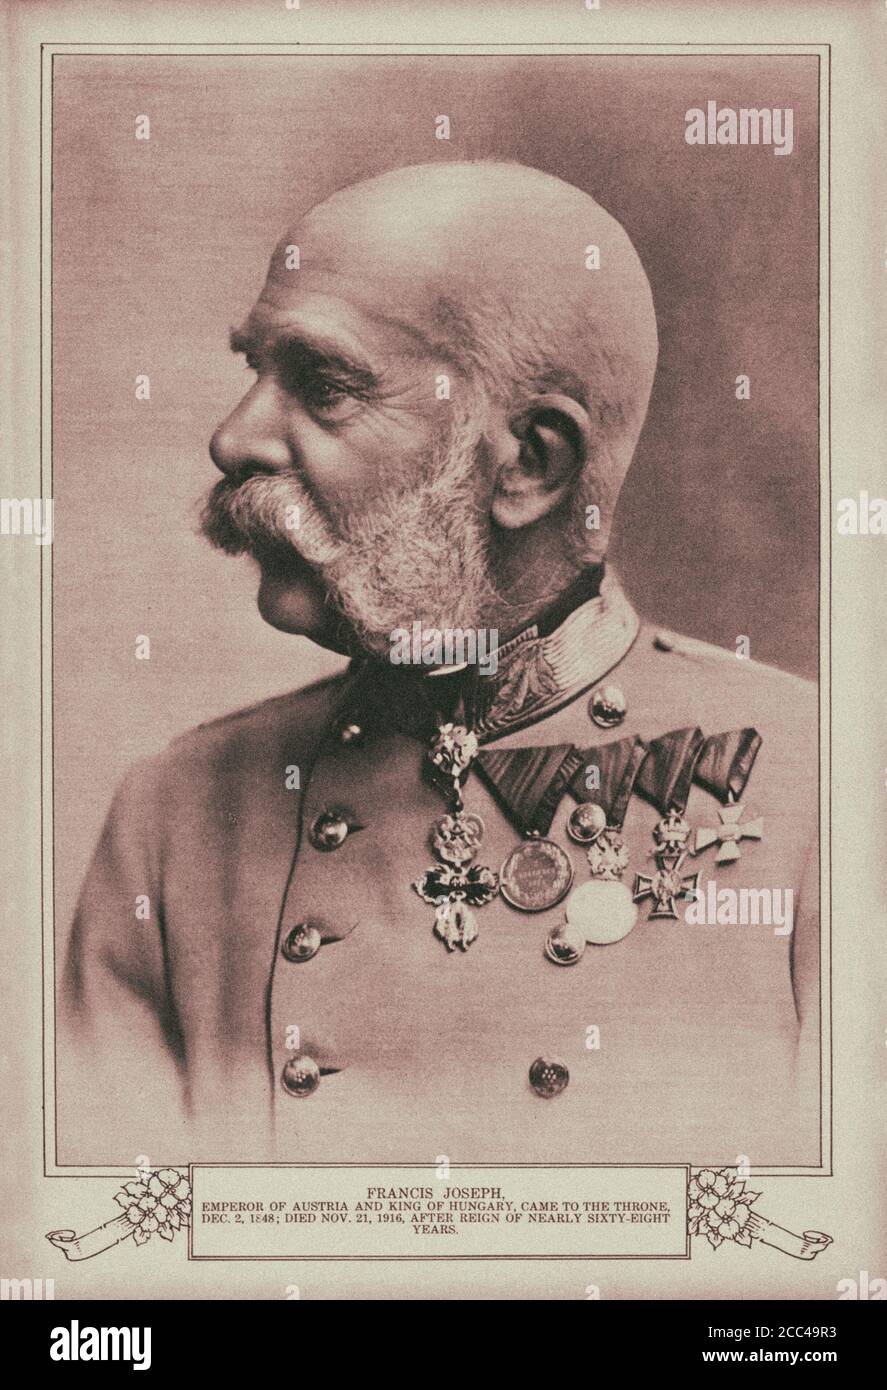 Franz Joseph I or Francis Joseph I (1830 – 1916) was Emperor of Austria, King of Hungary, Croatia, and Bohemia, and monarch of other states of the Aus Stock Photo